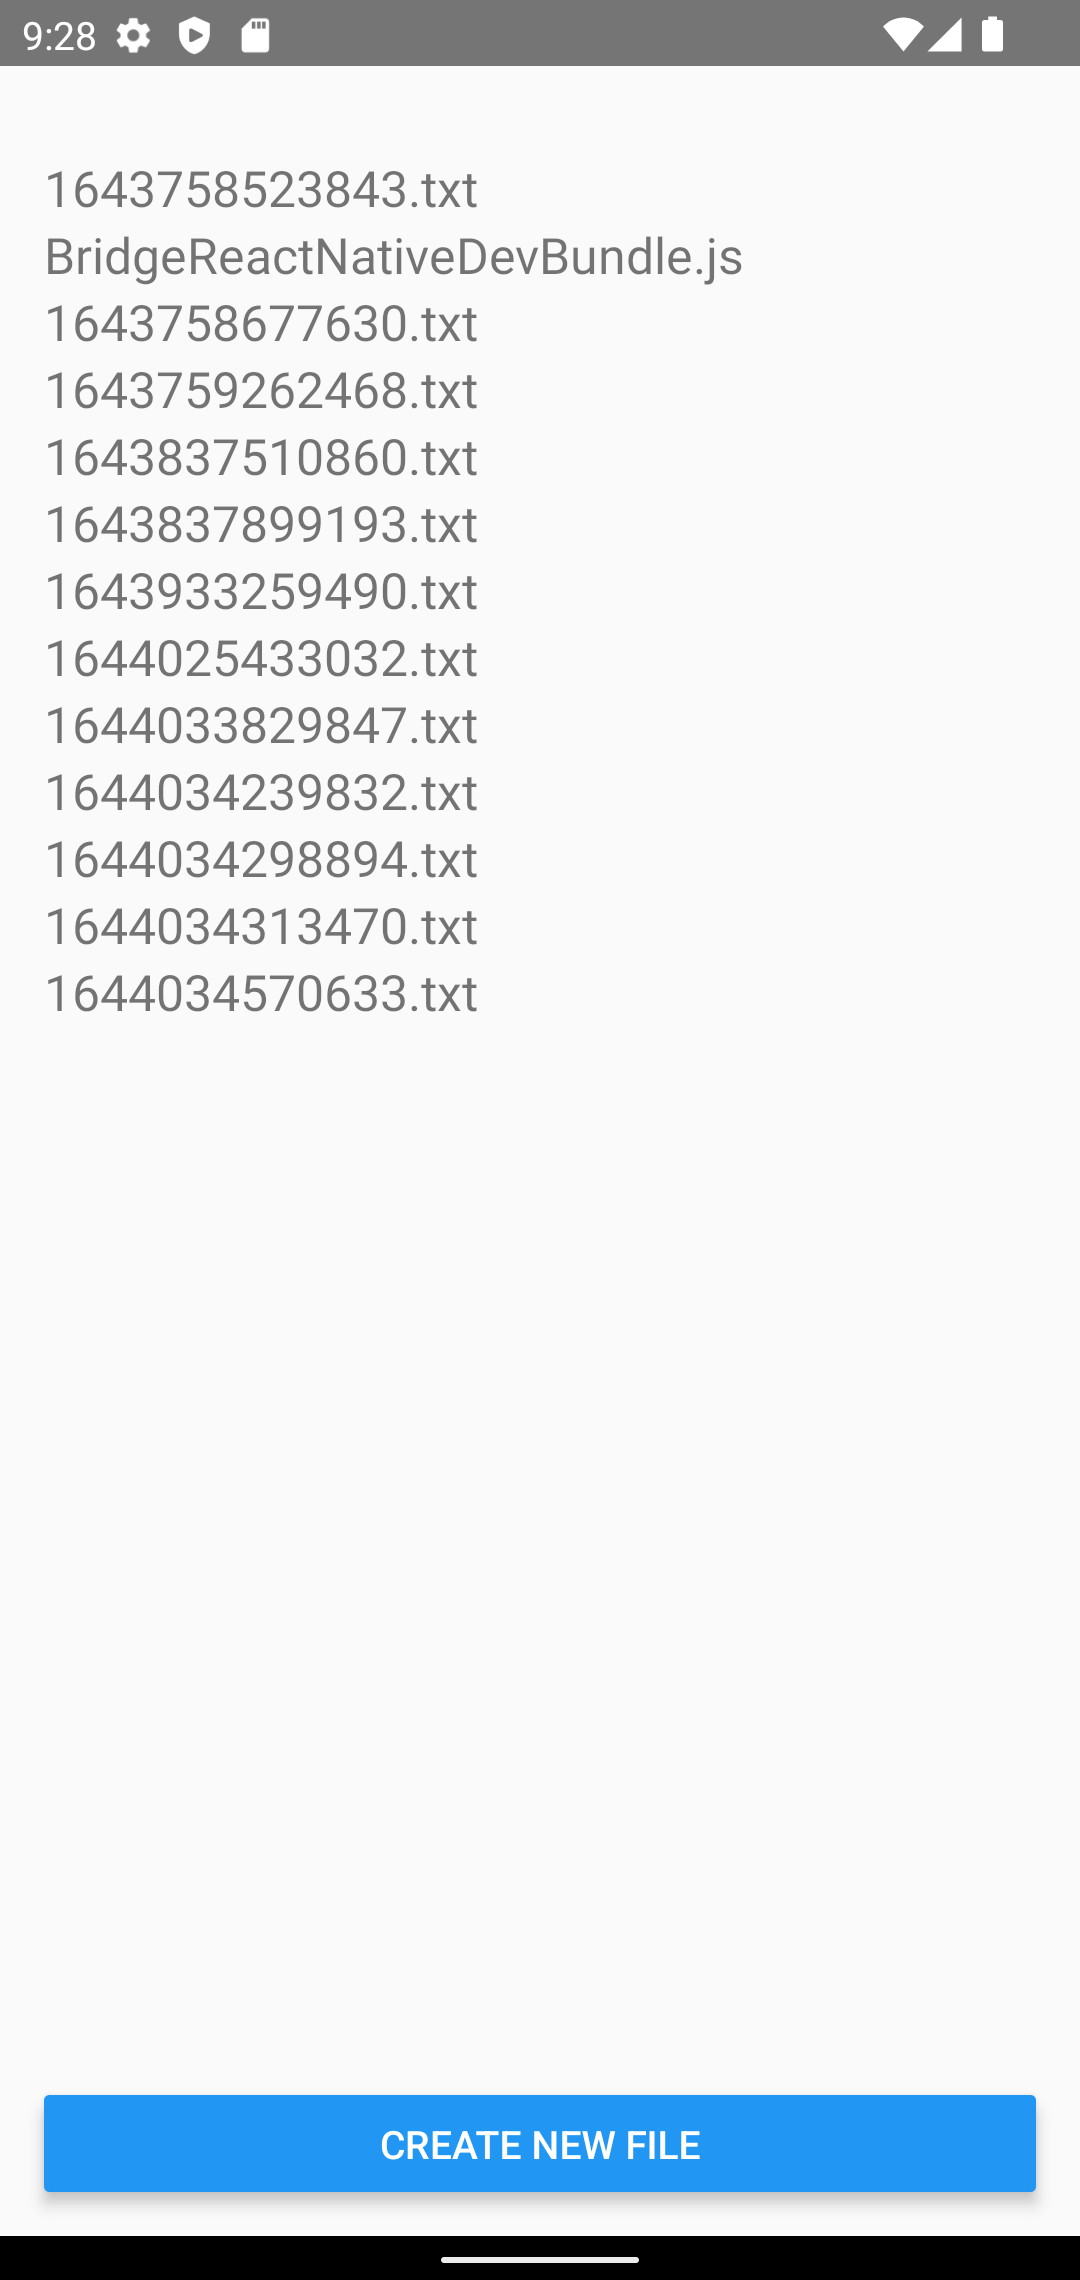 The list of saved files on Android